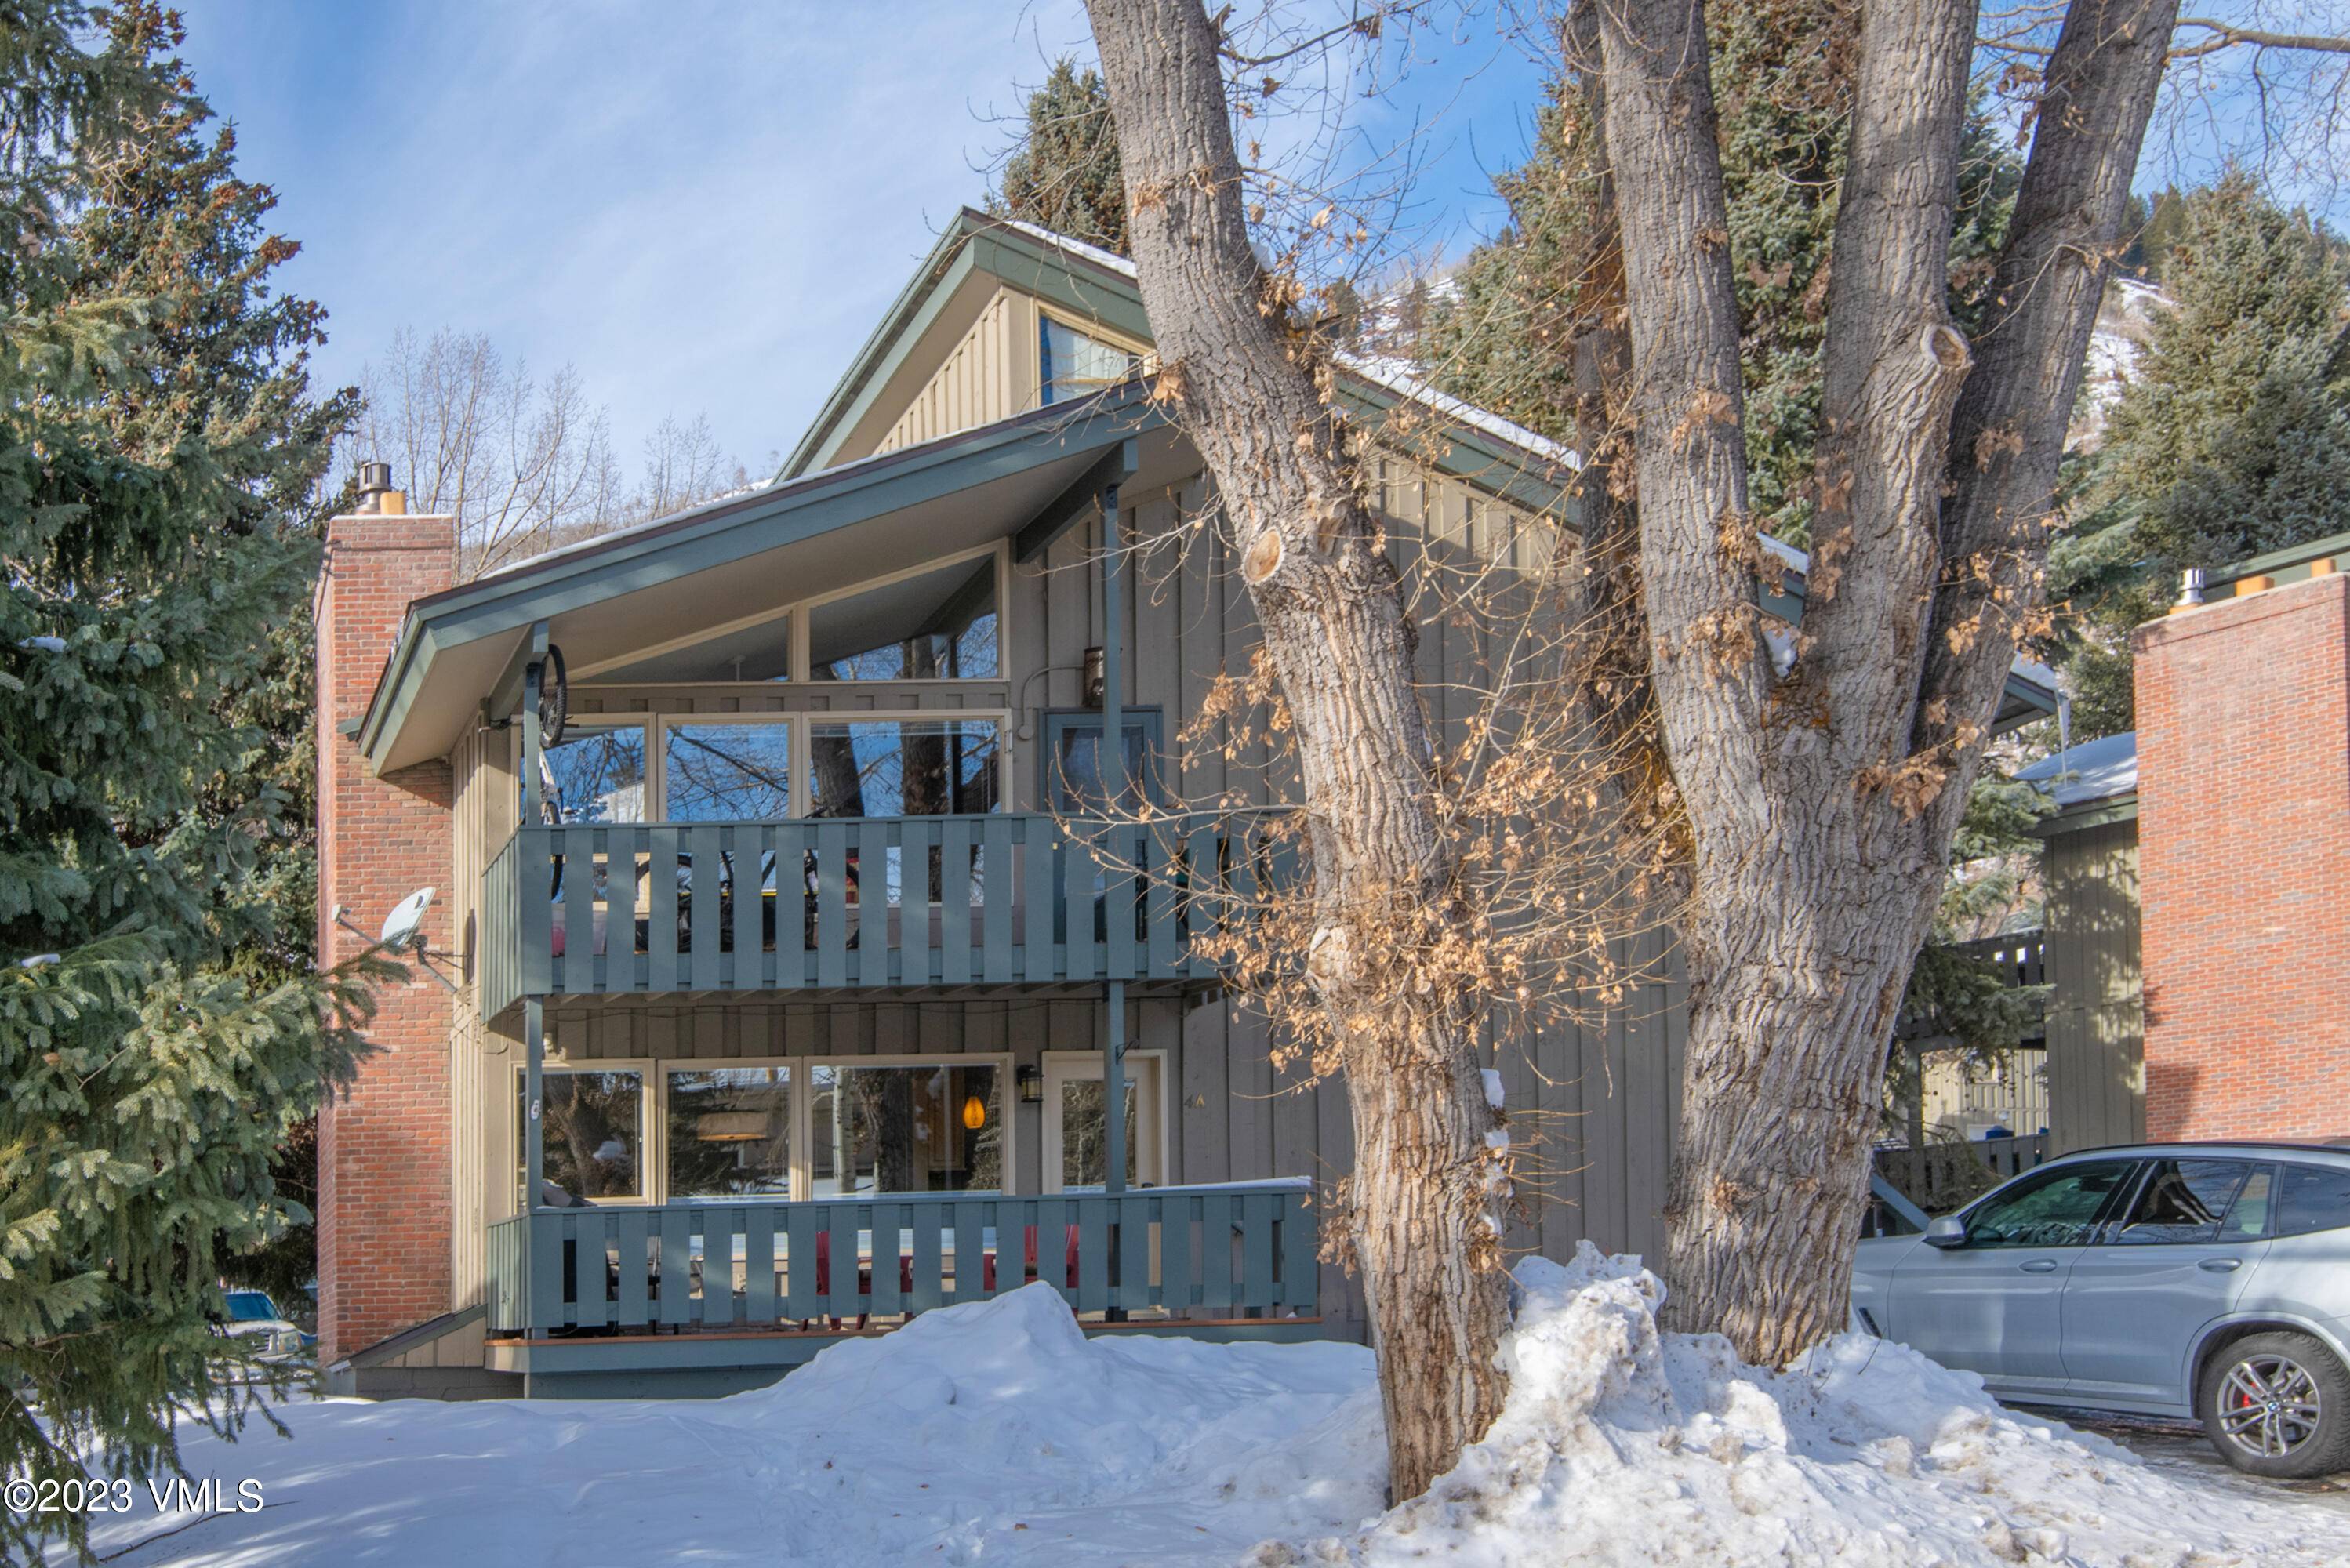 Experience the perfect blend of modern comfort and mountain charm in this beautifully renovated ski condo.